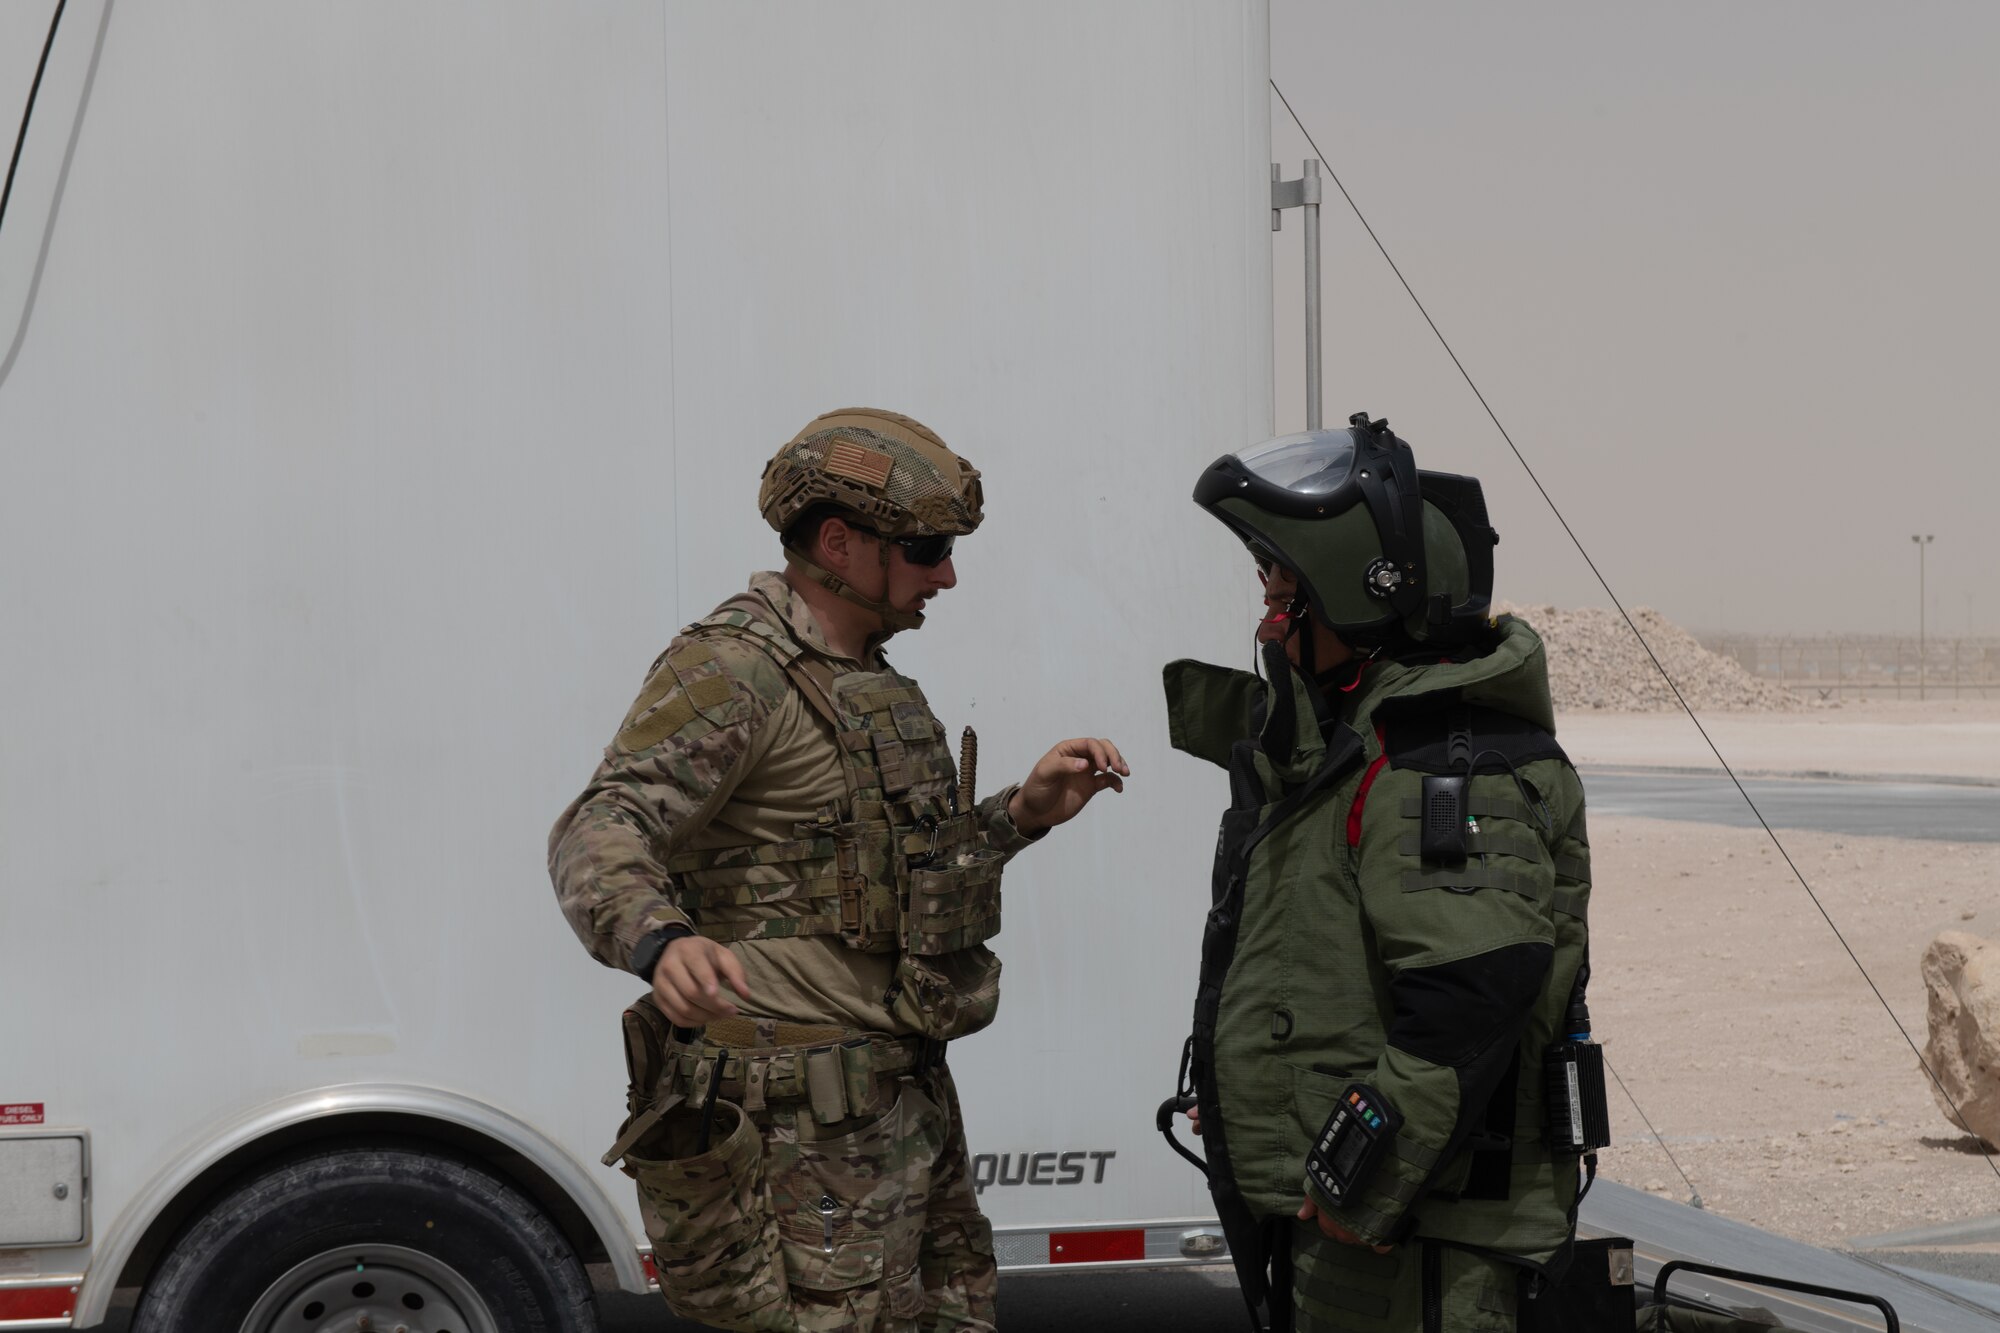 U.S. Air Force Tech. Sgt. Kyle Doran, an explosive ordinance disposal specialist with the 379th Expeditionary Civil Engineering Squadron, assists U.S. Air Force Staff Sgt. George Cochran as he dons a protective suit during an exercise on Al Udeid Air Base, Qatar, June 27, 2022. The armored suit helps protect EODs while working with explosive ordinance. (U.S. Air National Guard photo by Airman 1st Class Constantine Bambakidis)